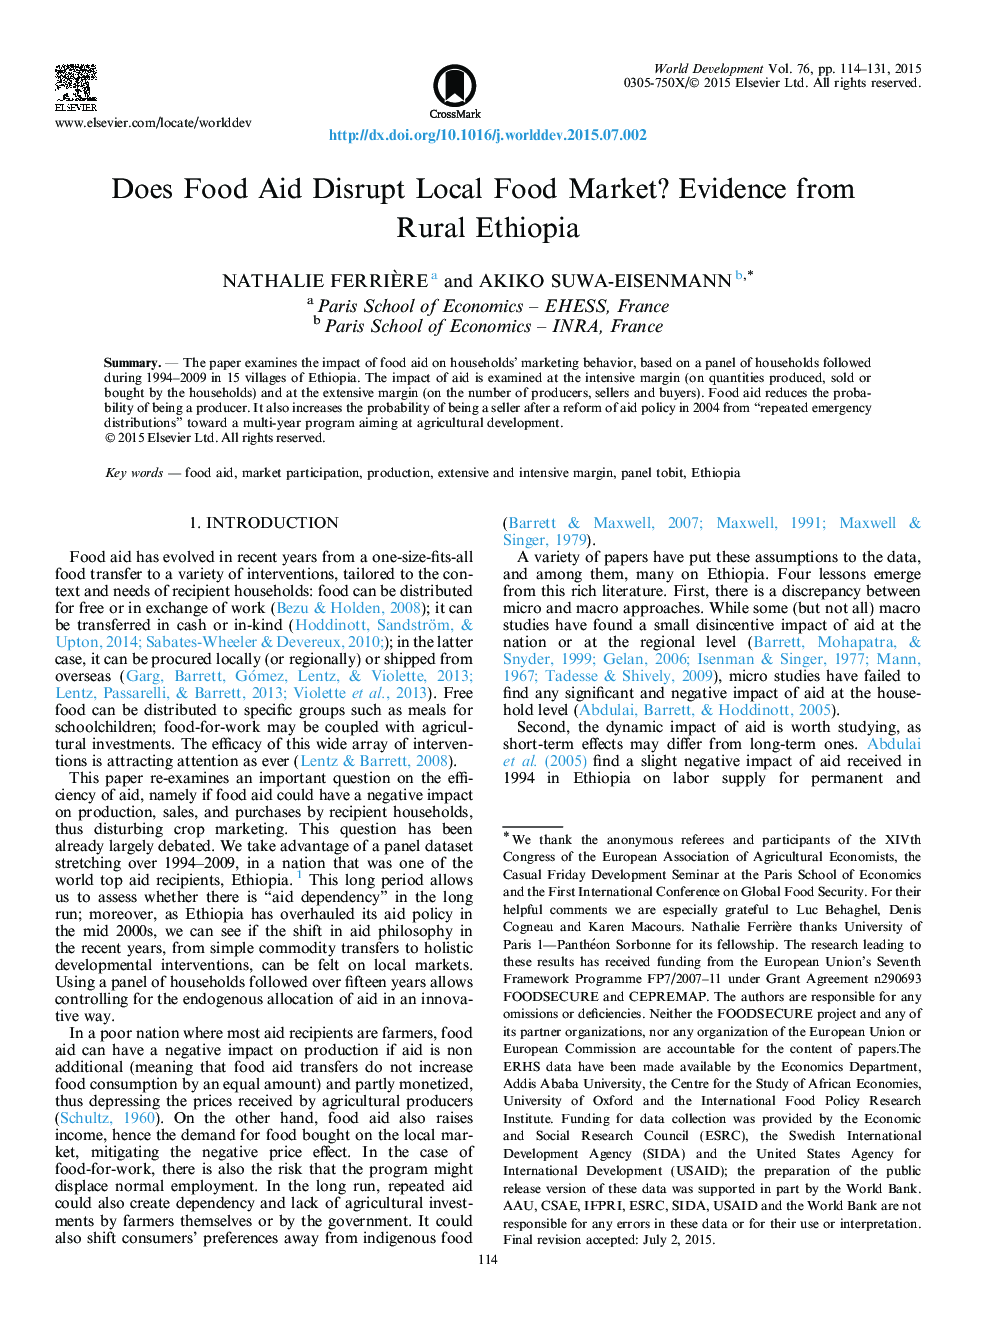 Does Food Aid Disrupt Local Food Market? Evidence from Rural Ethiopia